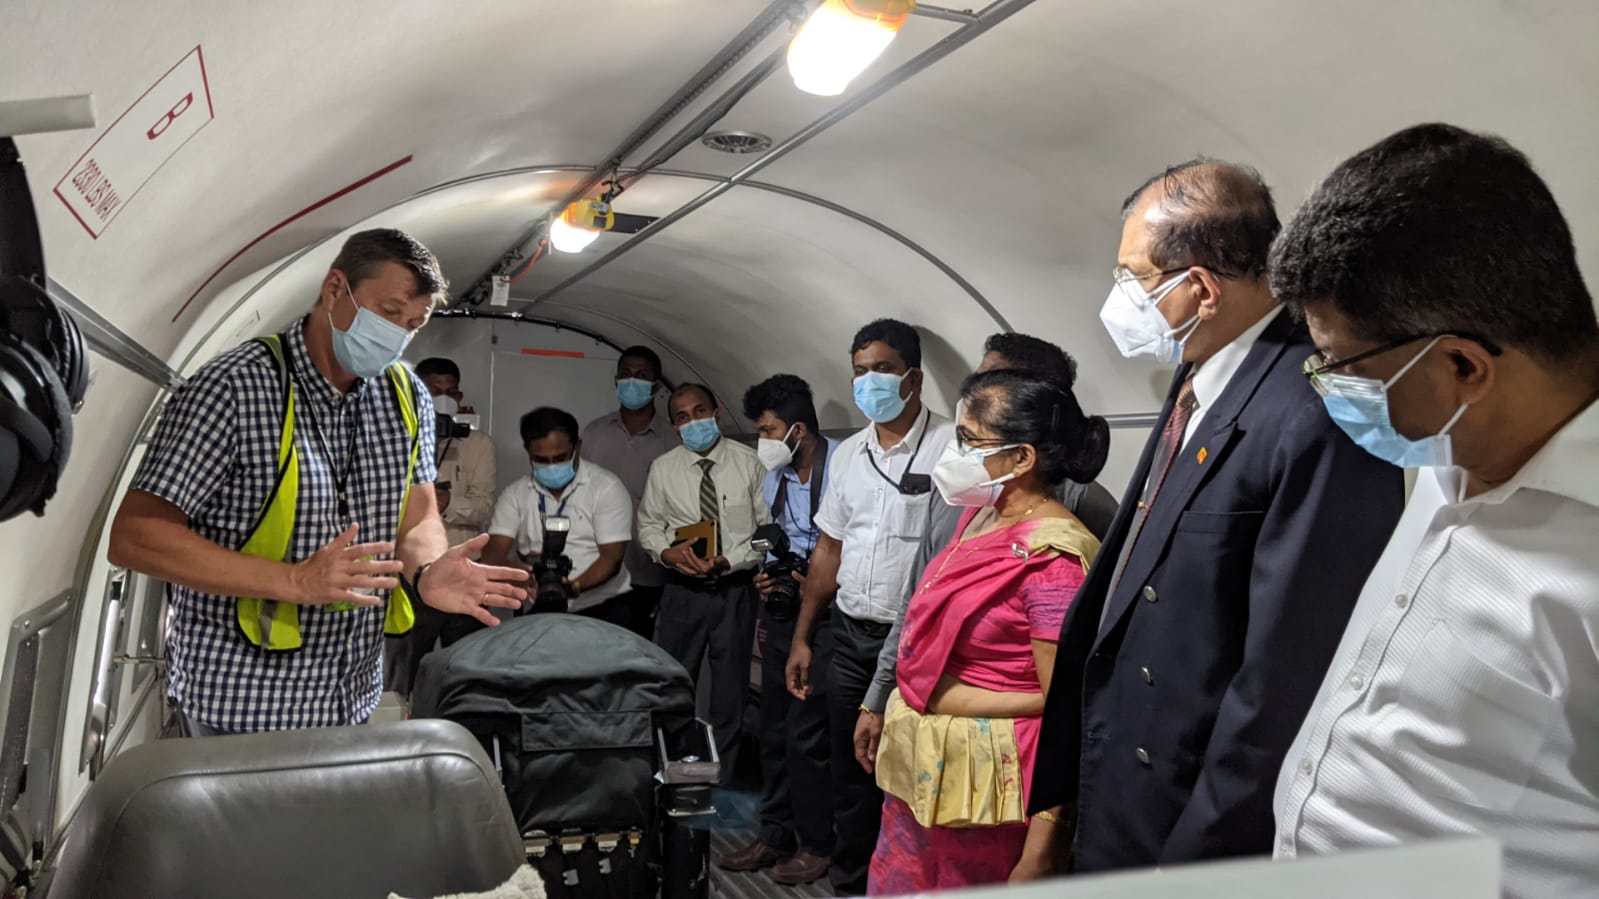 Press and Ministers aboard Aircraft in Sri Lanka